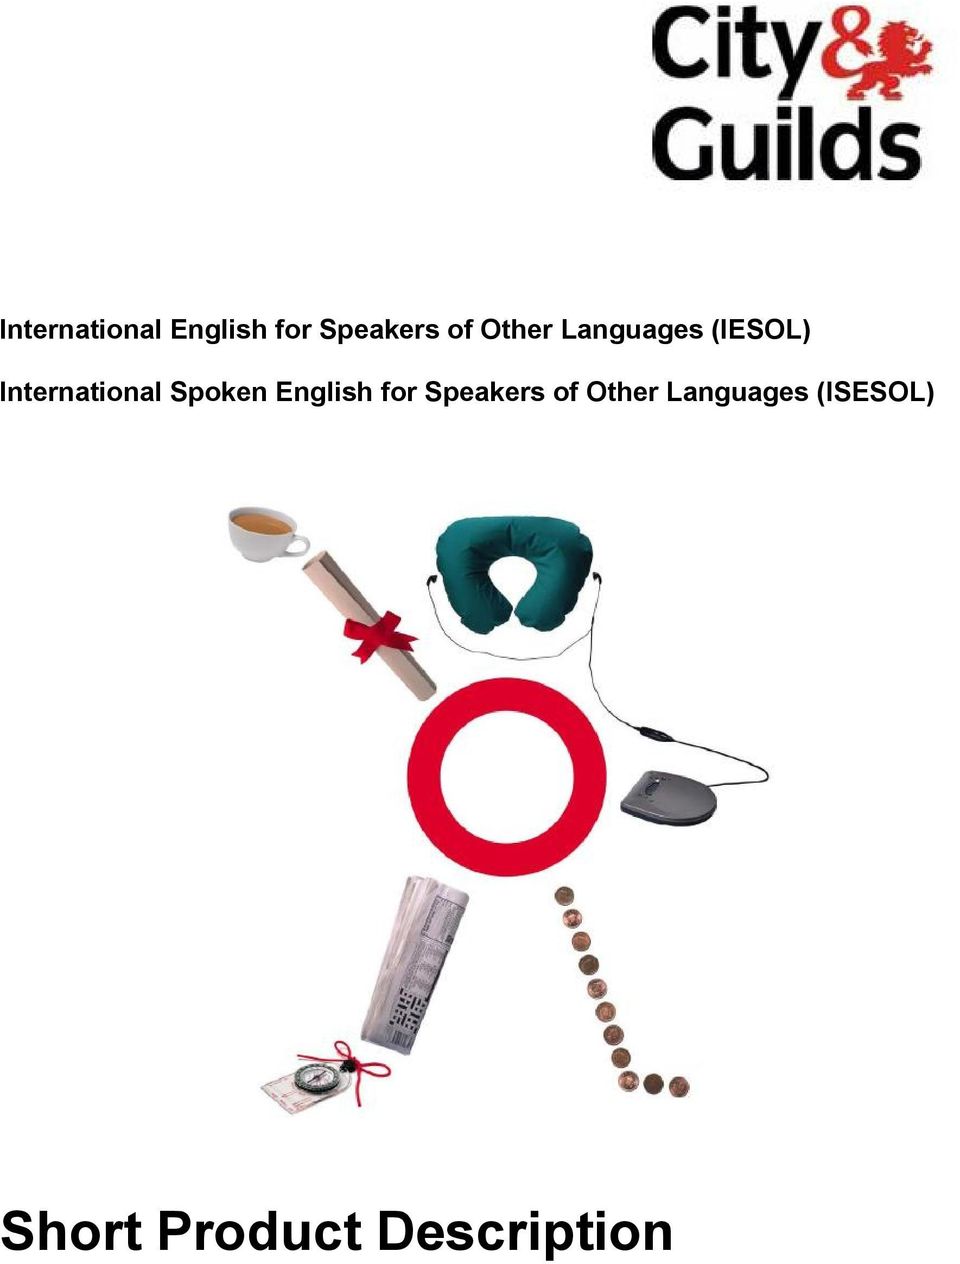 Spoken English for Speakers of Other